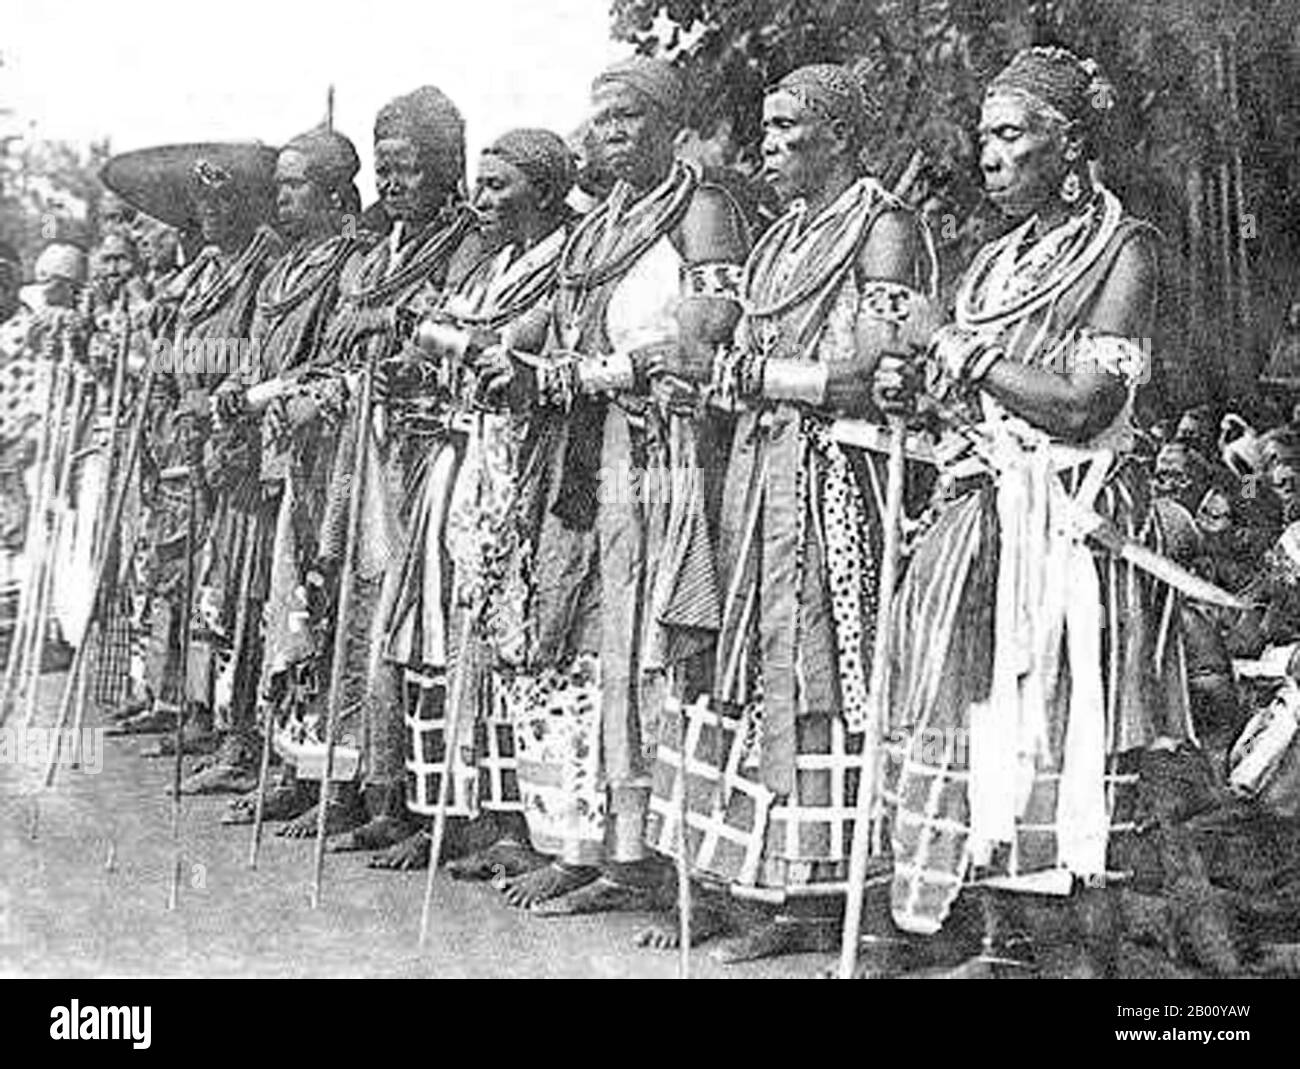 Benin/Dahomey:  Group of retired Mino or 'Dahomey Amazons'. Photo by Edmond Fortier (1862-1918), 1908.  The Dahomey Amazons or Mino were a Fon all-female military regiment of the Kingdom of Dahomey (now Benin) which lasted until the end of the 19th century. The Mino were recruited from among the ahosi ('king's wives') of which there were often hundreds. Some women in Fon society became ahosi voluntarily, while others were involuntarily enrolled if their husbands or fathers complained to the King about their behaviour. Stock Photo